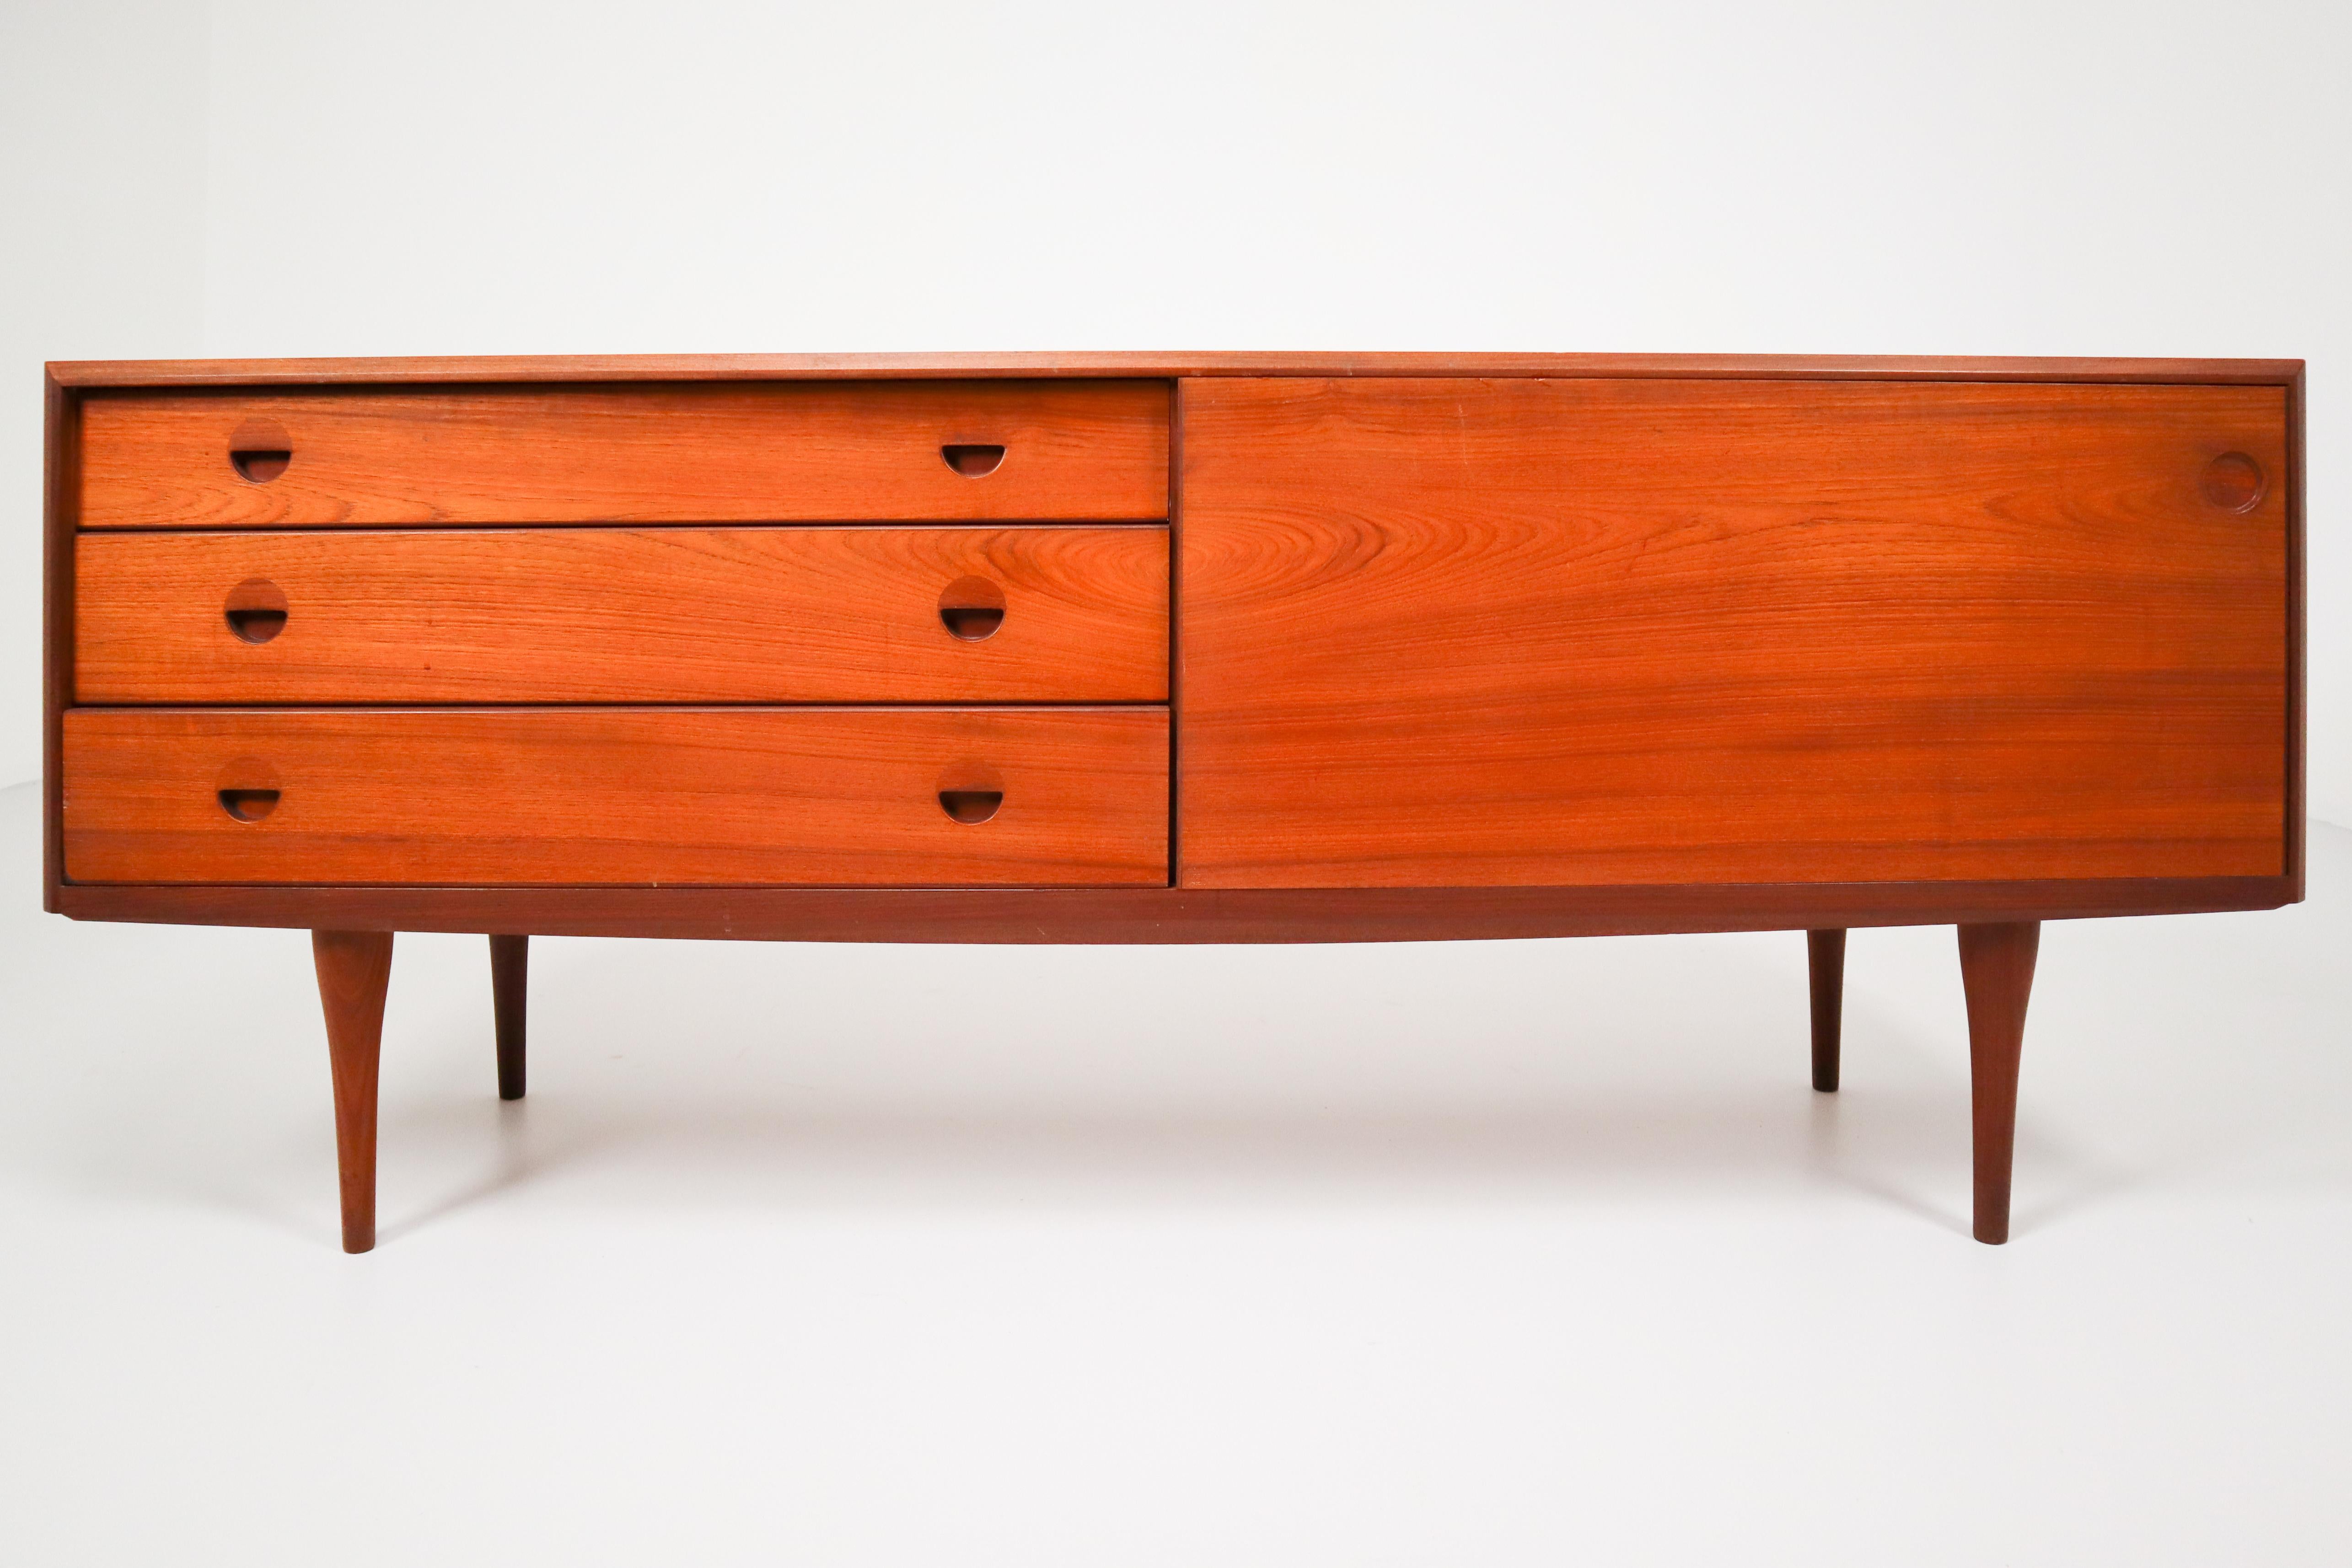 Striking teak sideboard from the 1960s made in Denmark in a smooth design where the beautiful wood grain falls into focus on the sliding doors and three drawers. This sideboard will contribute to a luxurious character of the interior. Preserved in